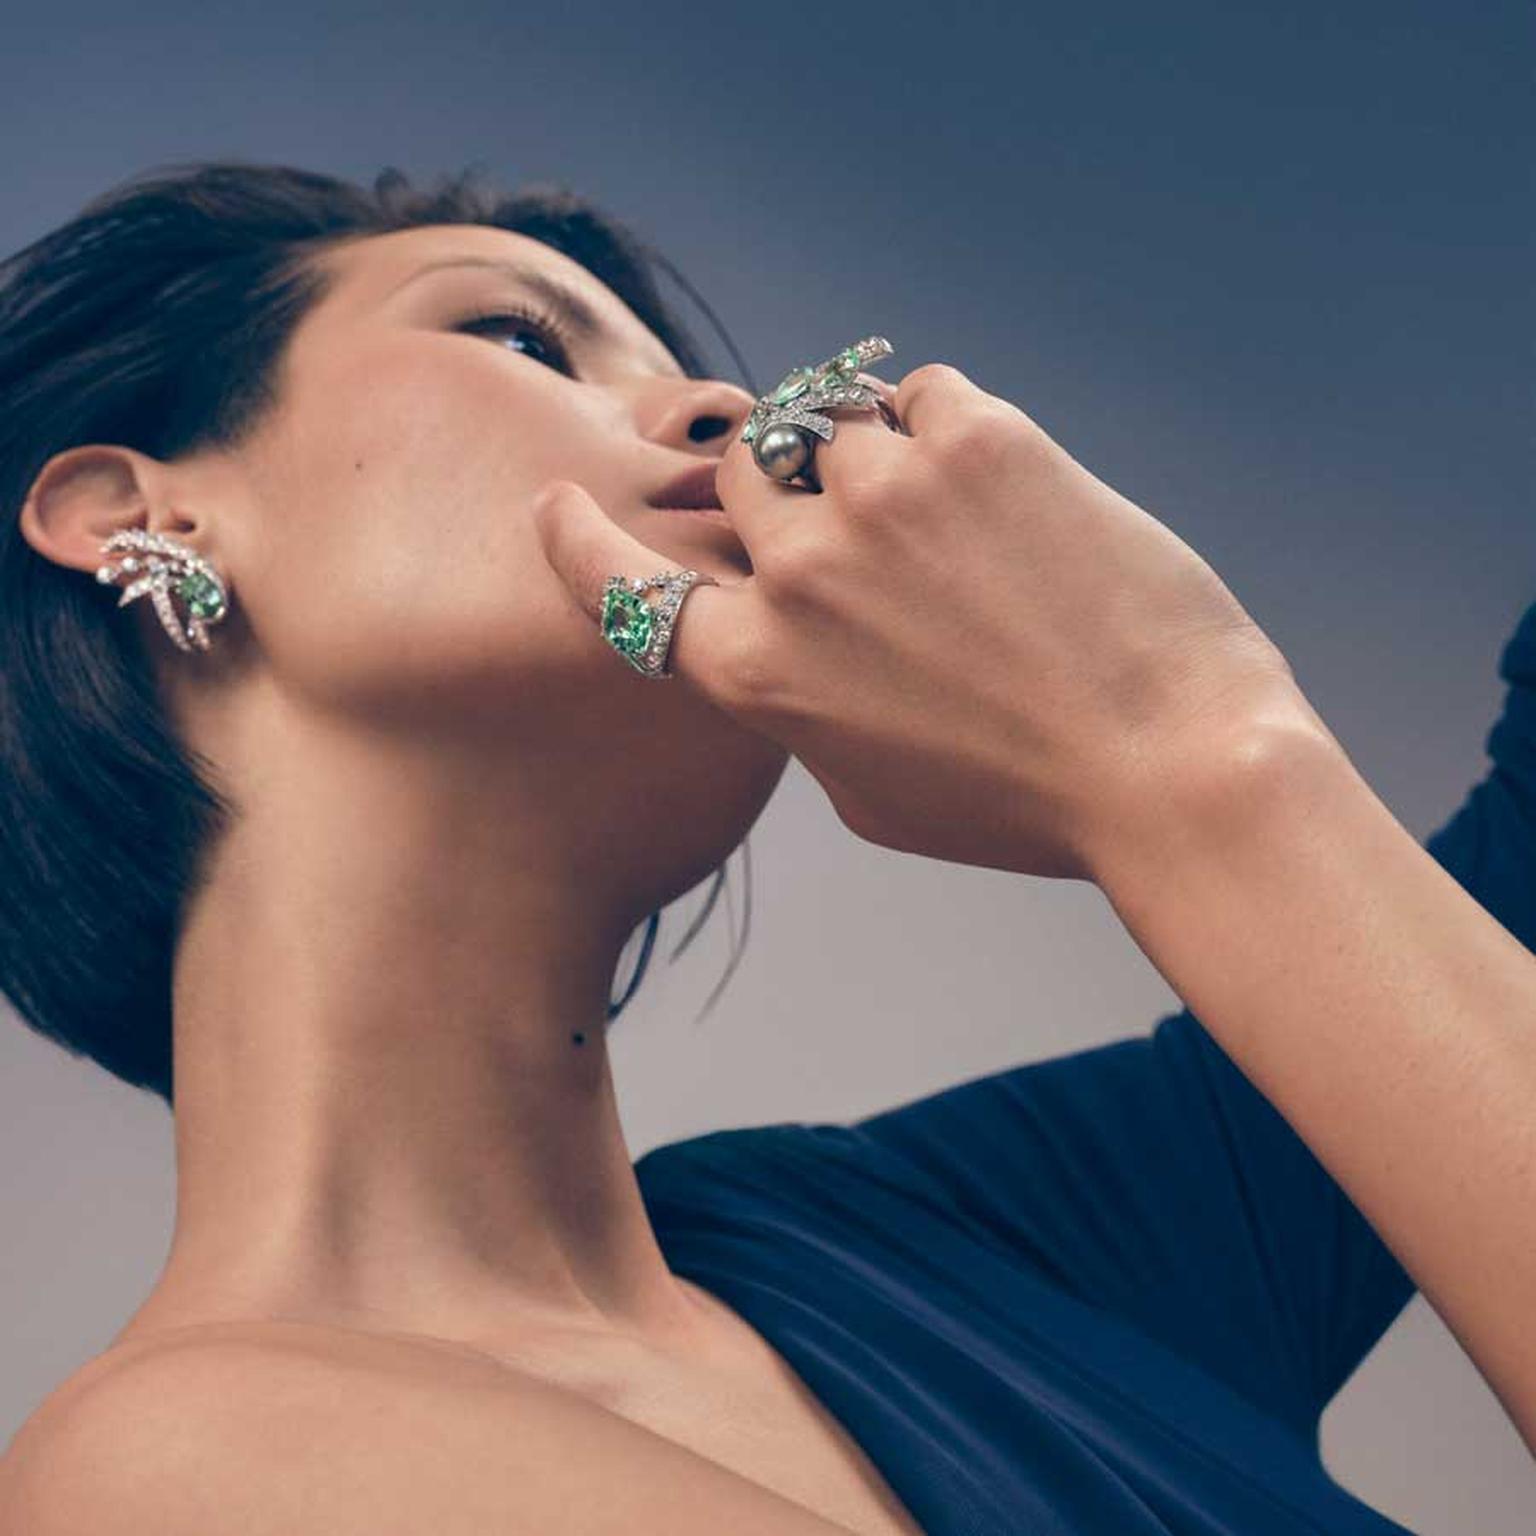 Don’t look back: the way ahead for high jewellery